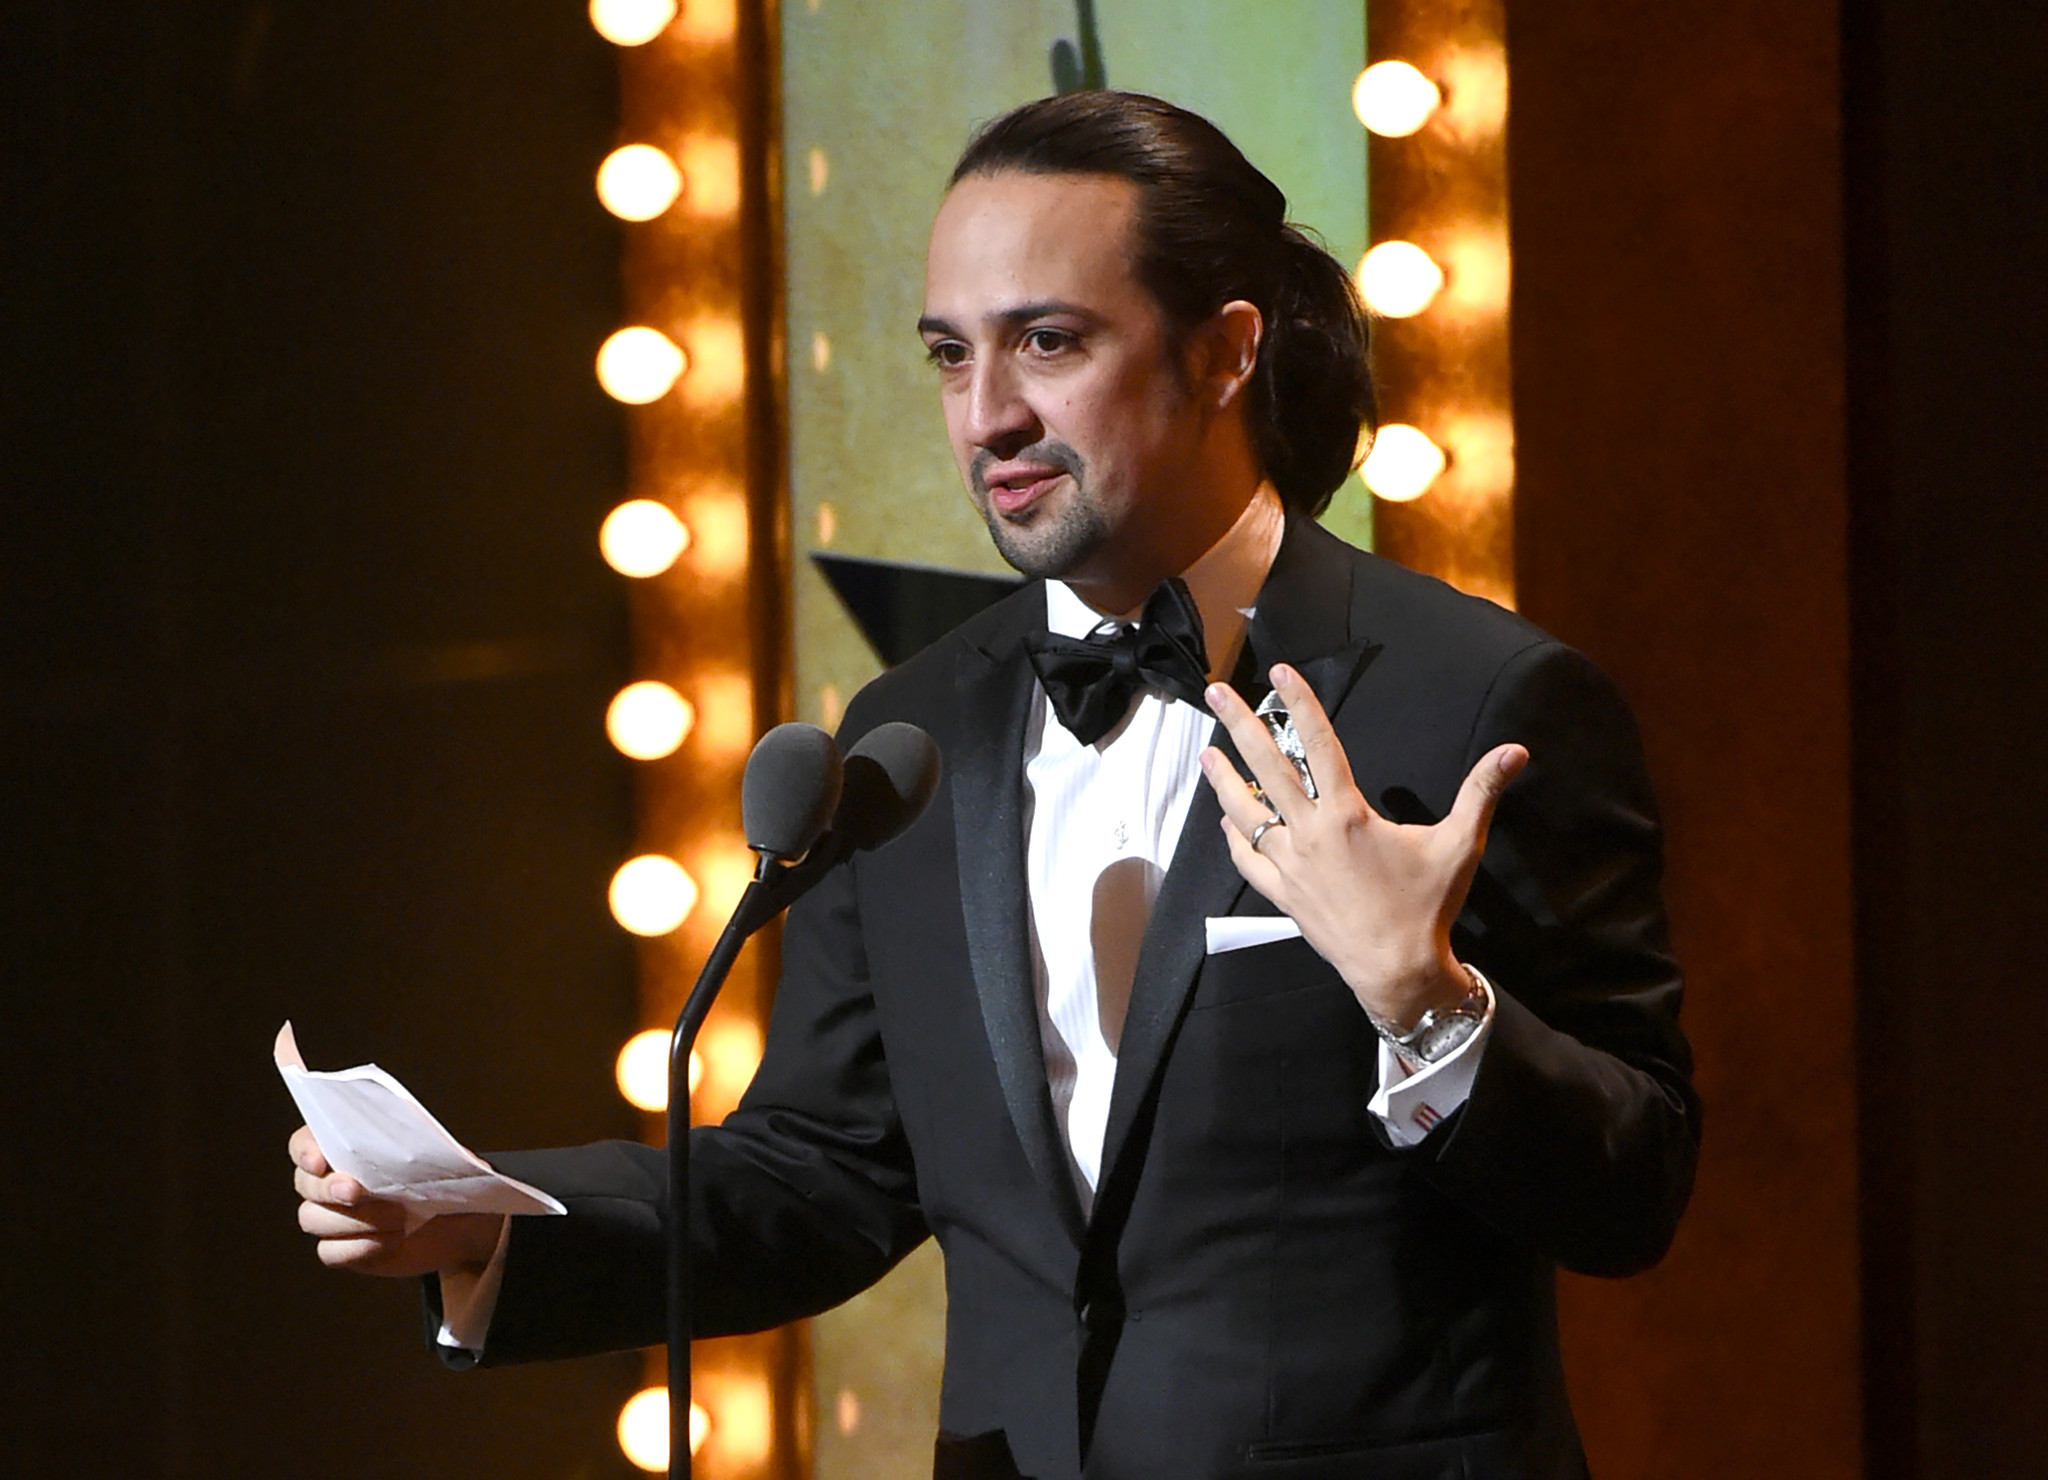 Lin-Manuel Miranda accepts the award for best original score for "Hamilton" at the Tony Awards at the Beacon Theatre on Sunday, June 12 in New York. (Evan Agostini / Invision / Associated Press)